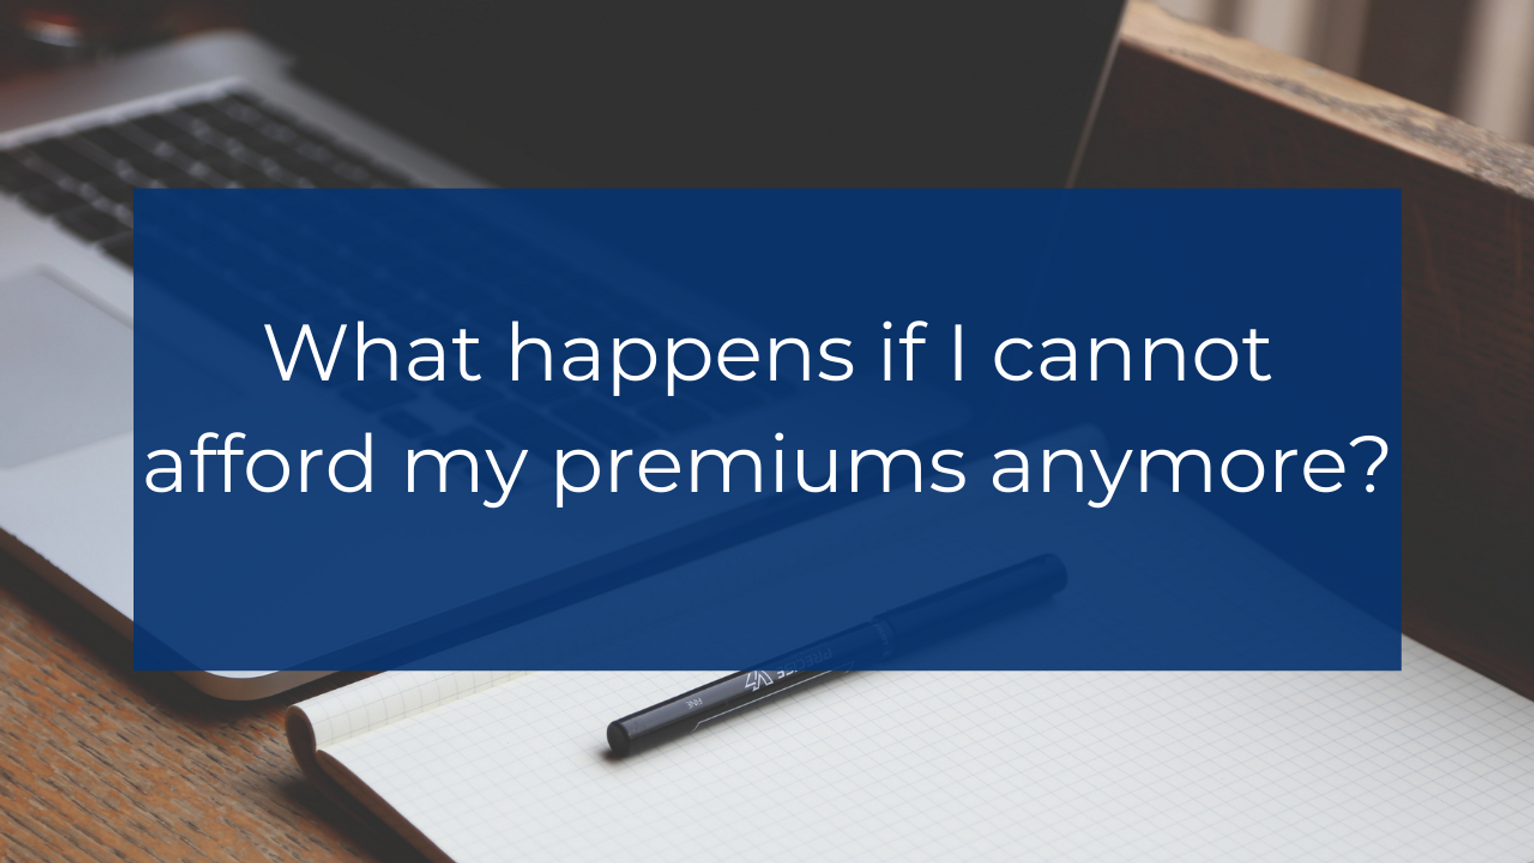 What happens if I cannot afford my premiums anymore?